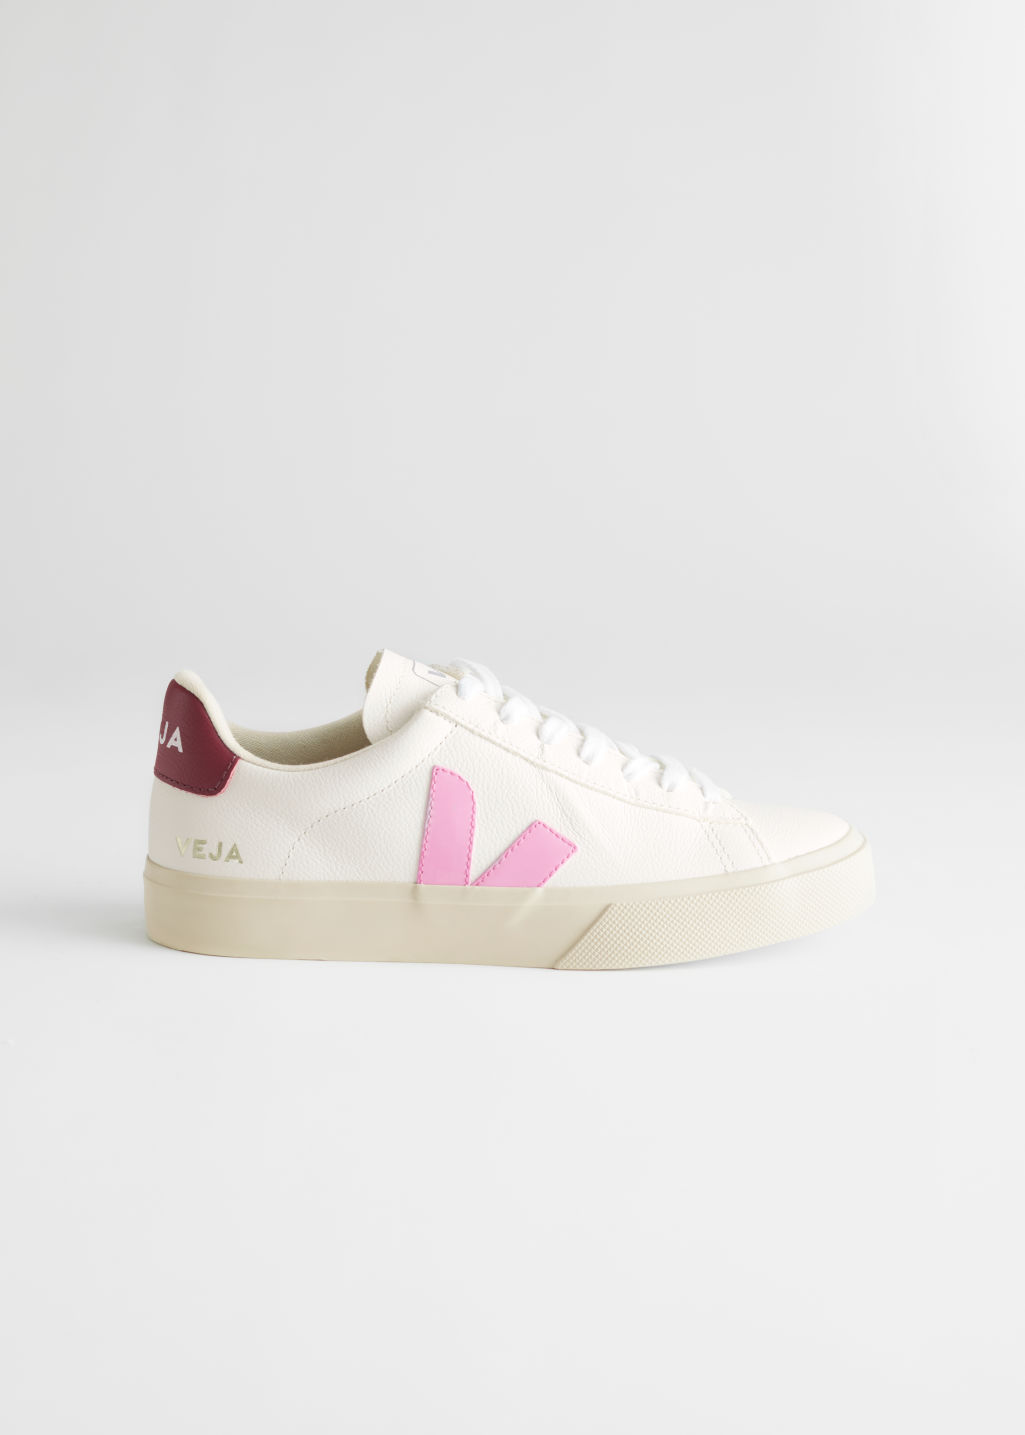 Veja Campo Chrome Free - Red, Pink - Veja - & Other Stories - Click Image to Close